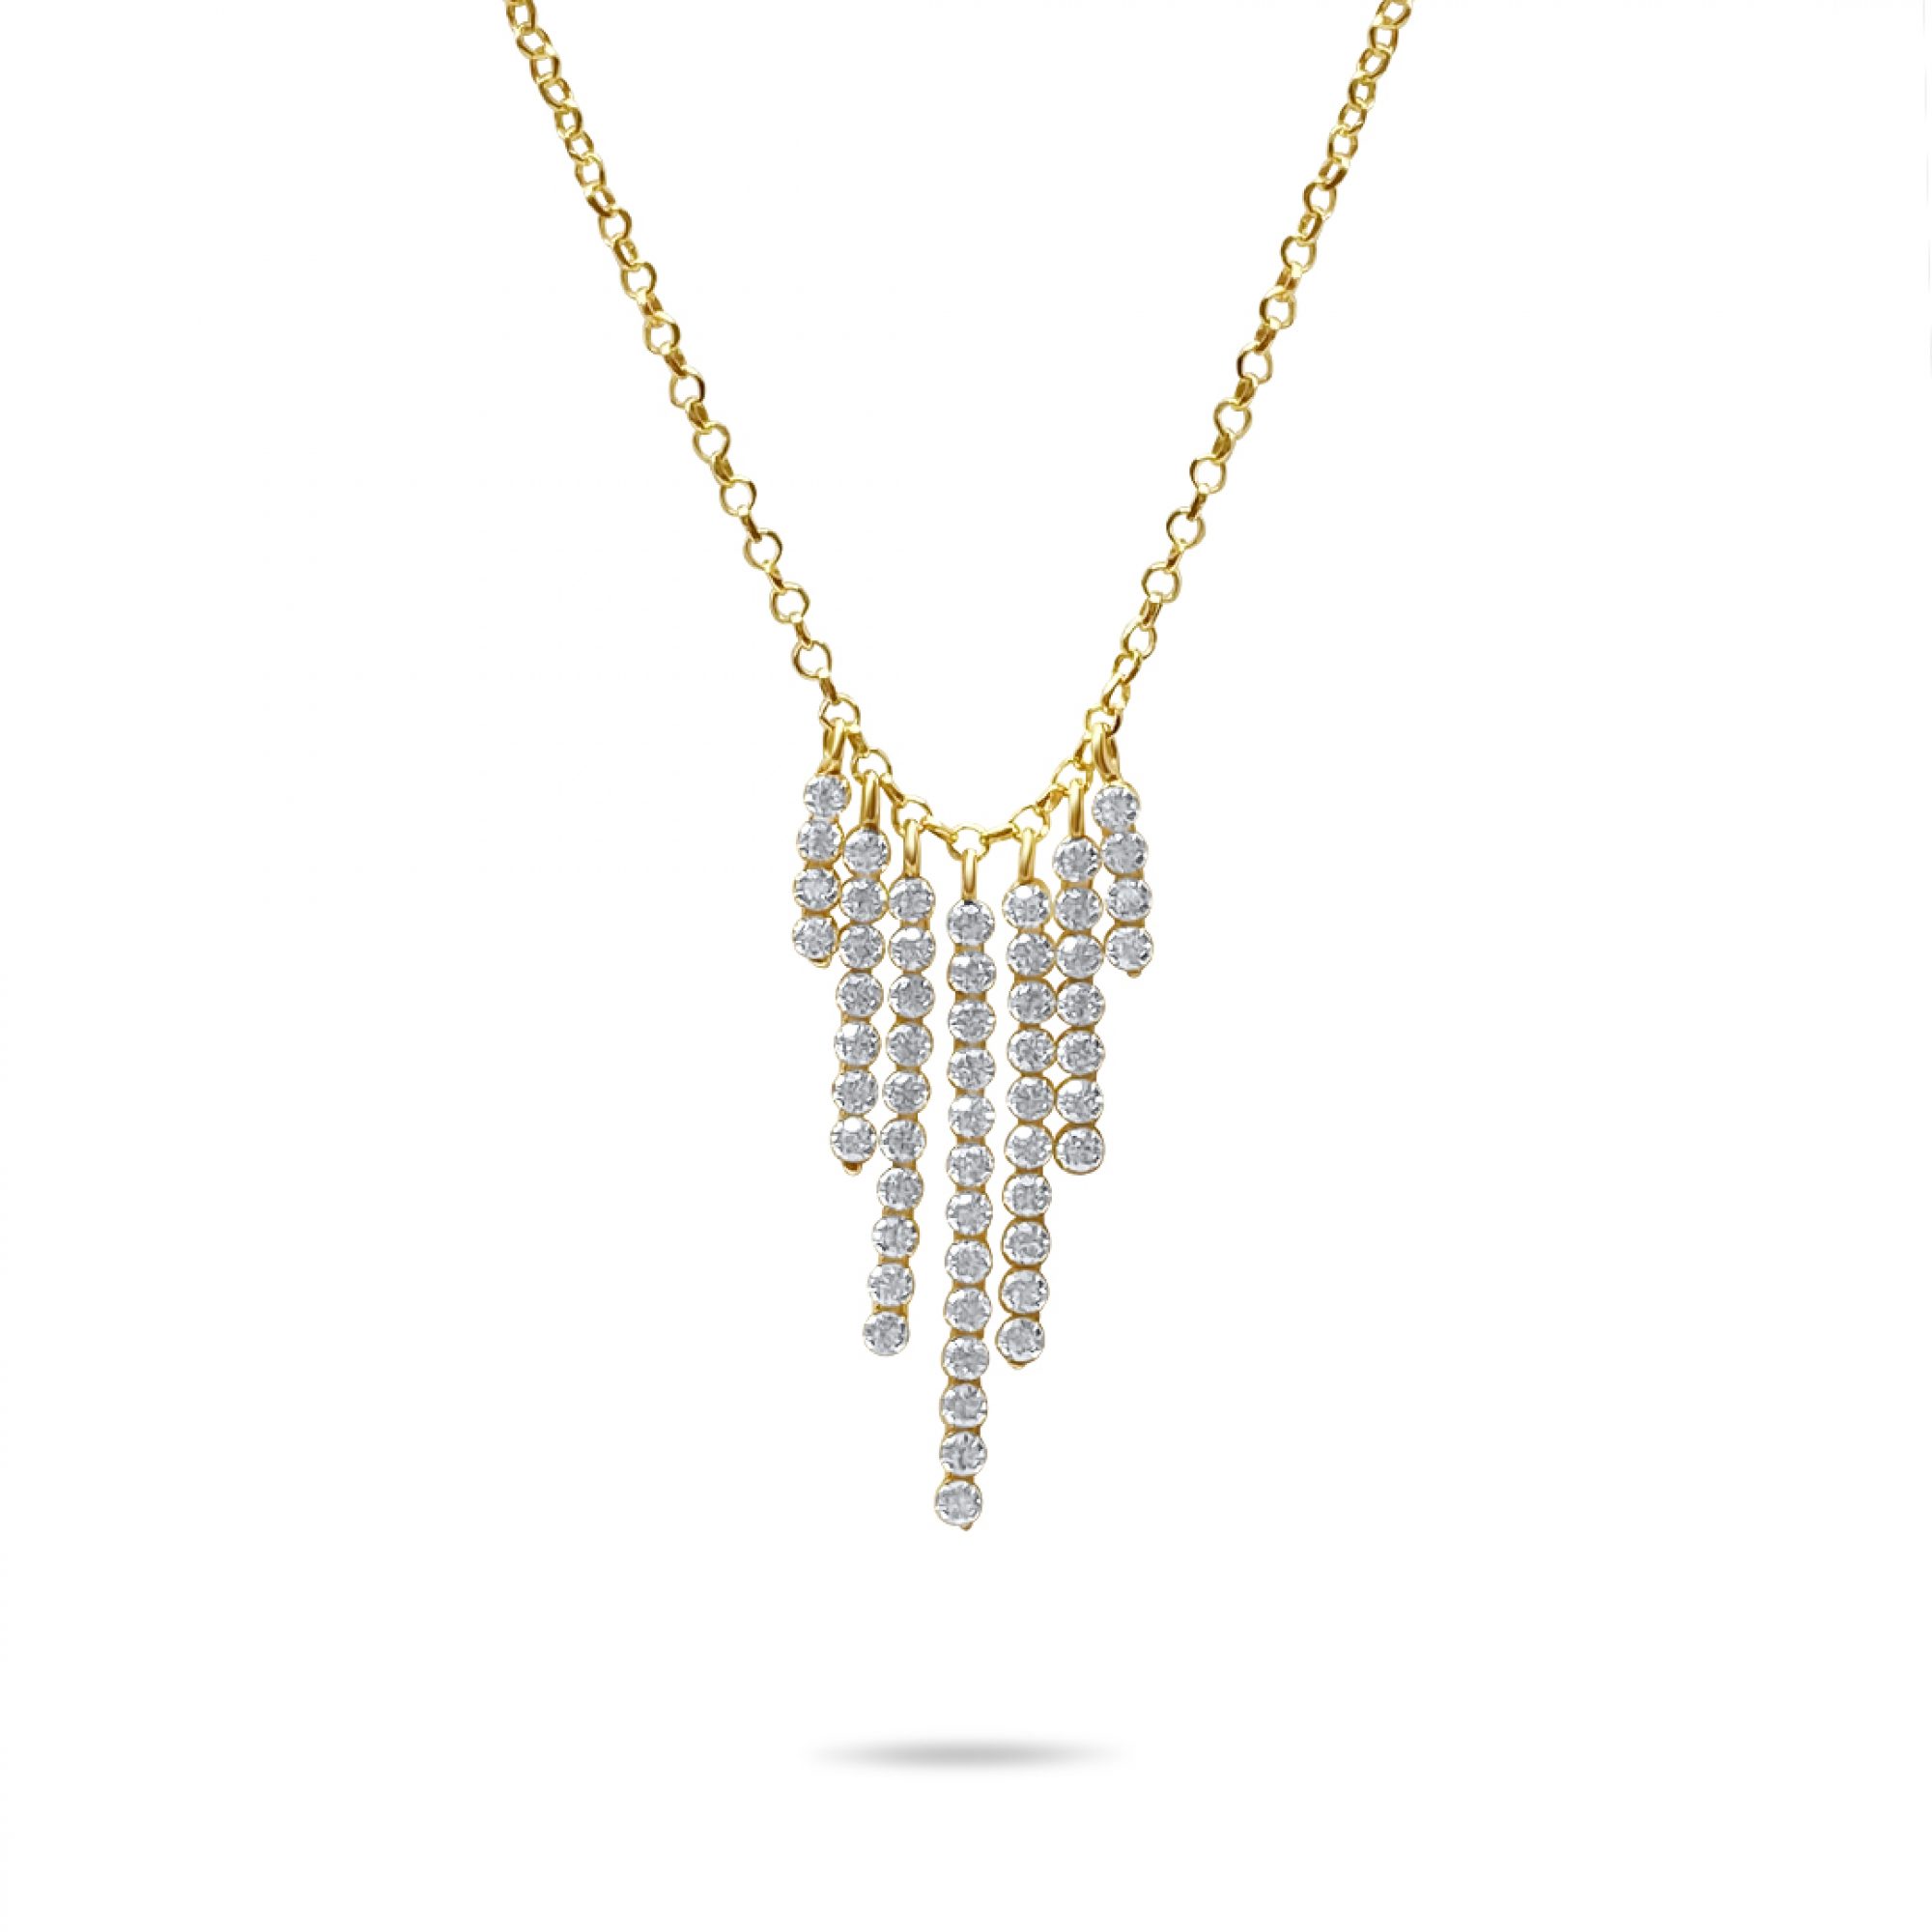 Gold plated necklace with zircon stones 